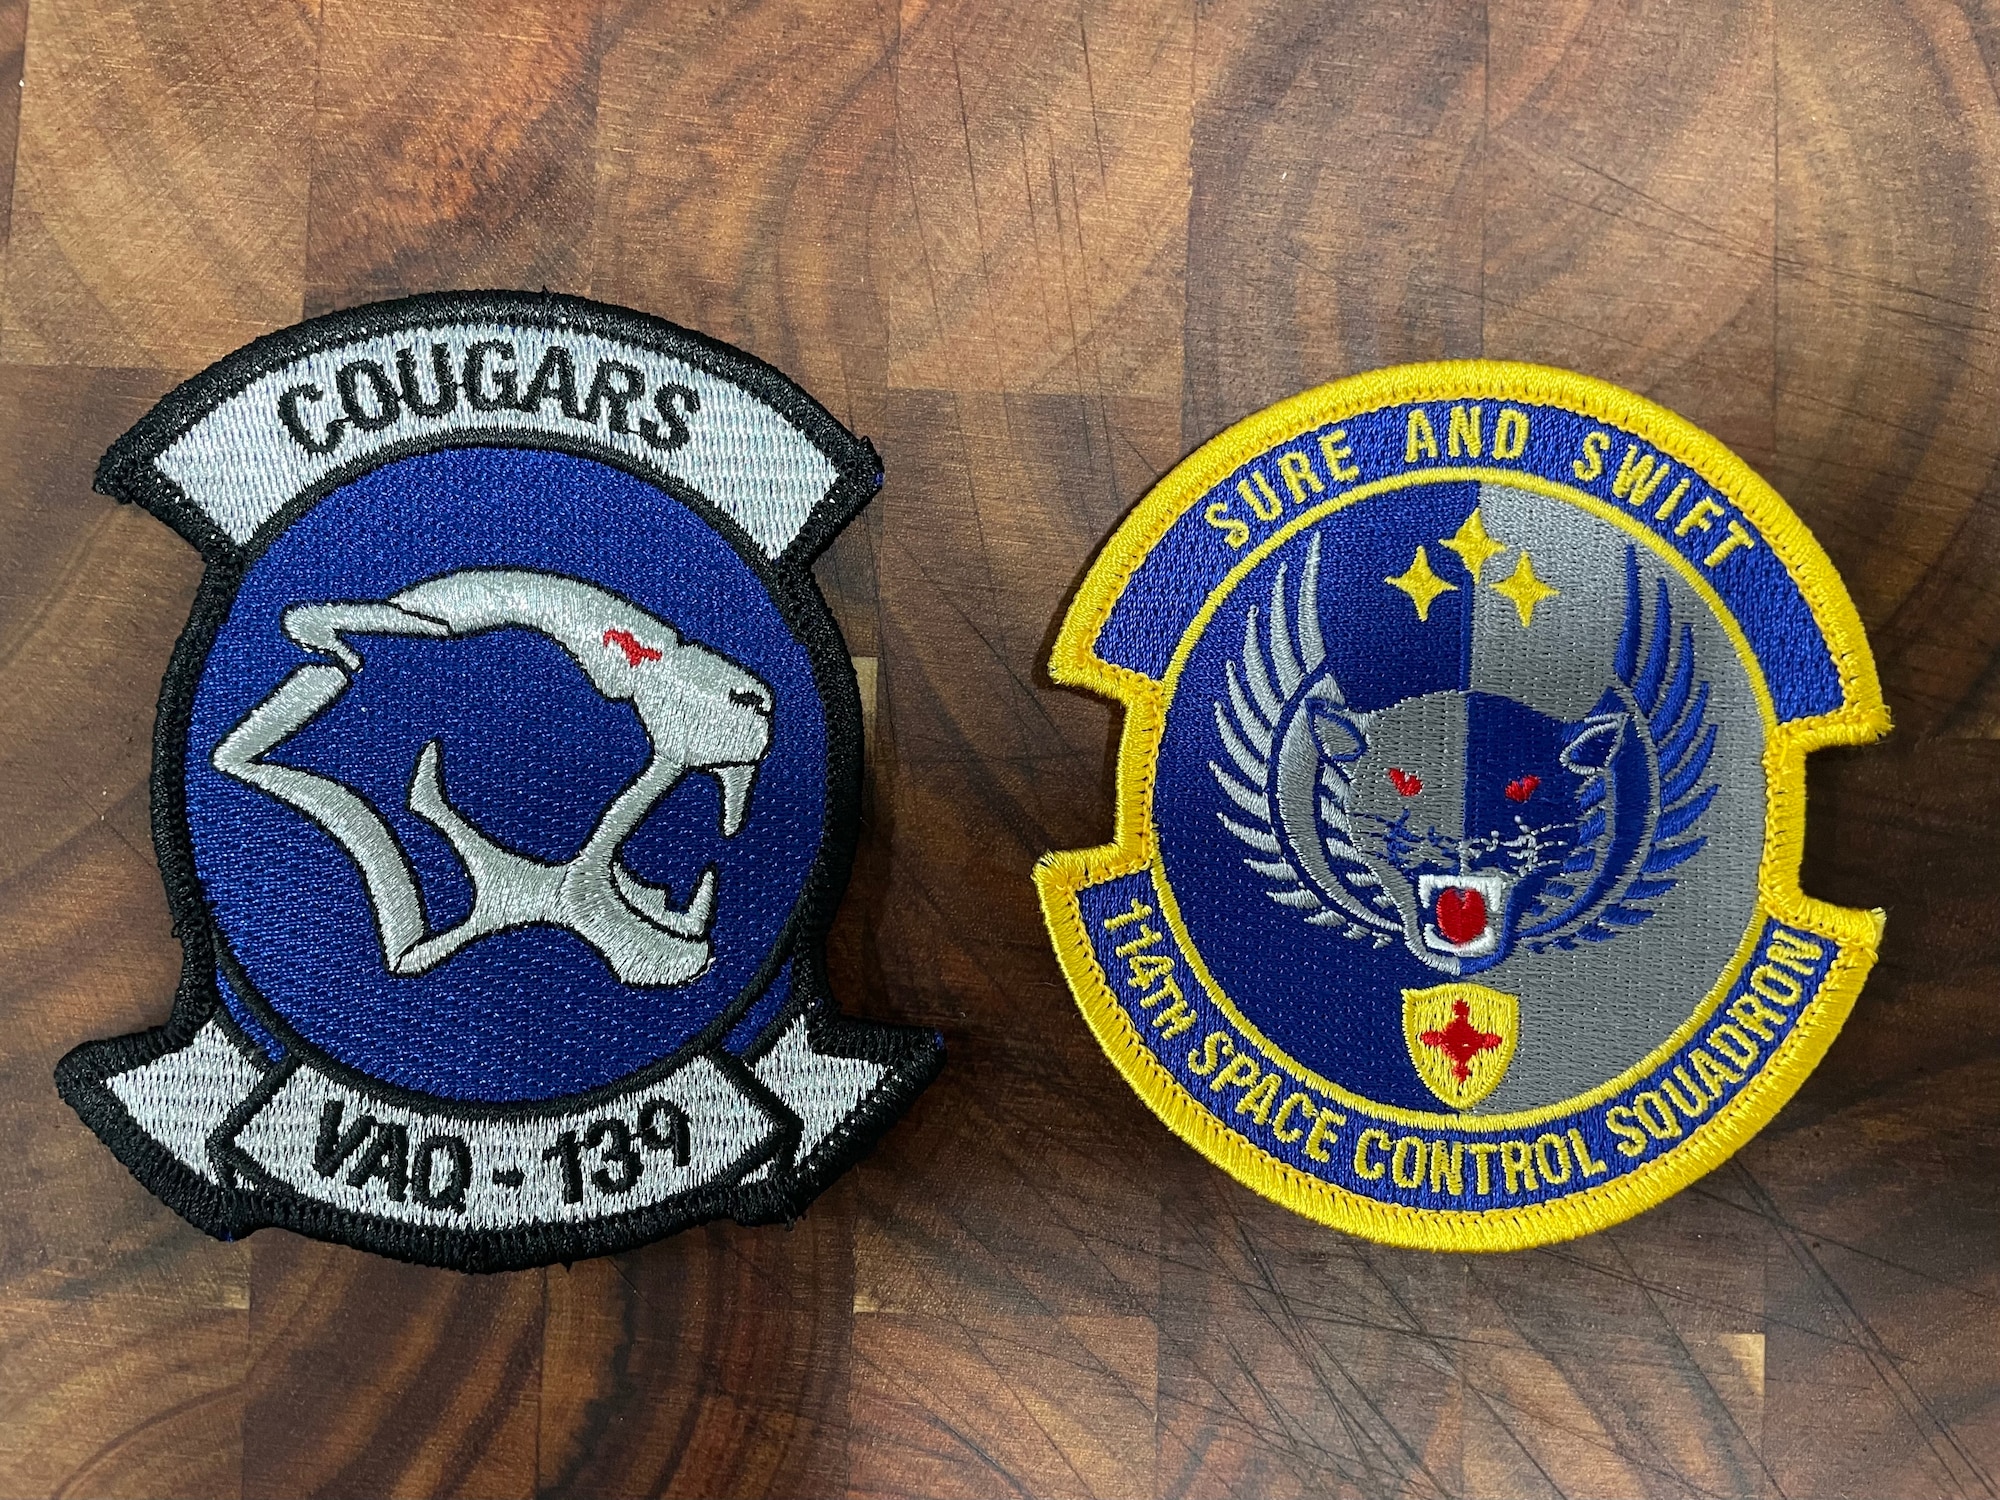 Pictured are the official patches of the U.S. Navy’s Electronic Attack Squadron 139 (VAQ-139), and the U.S. Air Force's 114th Space Control Squadron, who are known as the "Cougars" and "Thundercats," respectively. The squadrons collaborated in December 2021 during a two-day mission coined Operation SPACECAT. The purpose of the mission was to share best practices among tactical Electromagnetic Warfare experts about the capabilities of systems and learn about space missions in and around Cape Canaveral Space Station, FL.